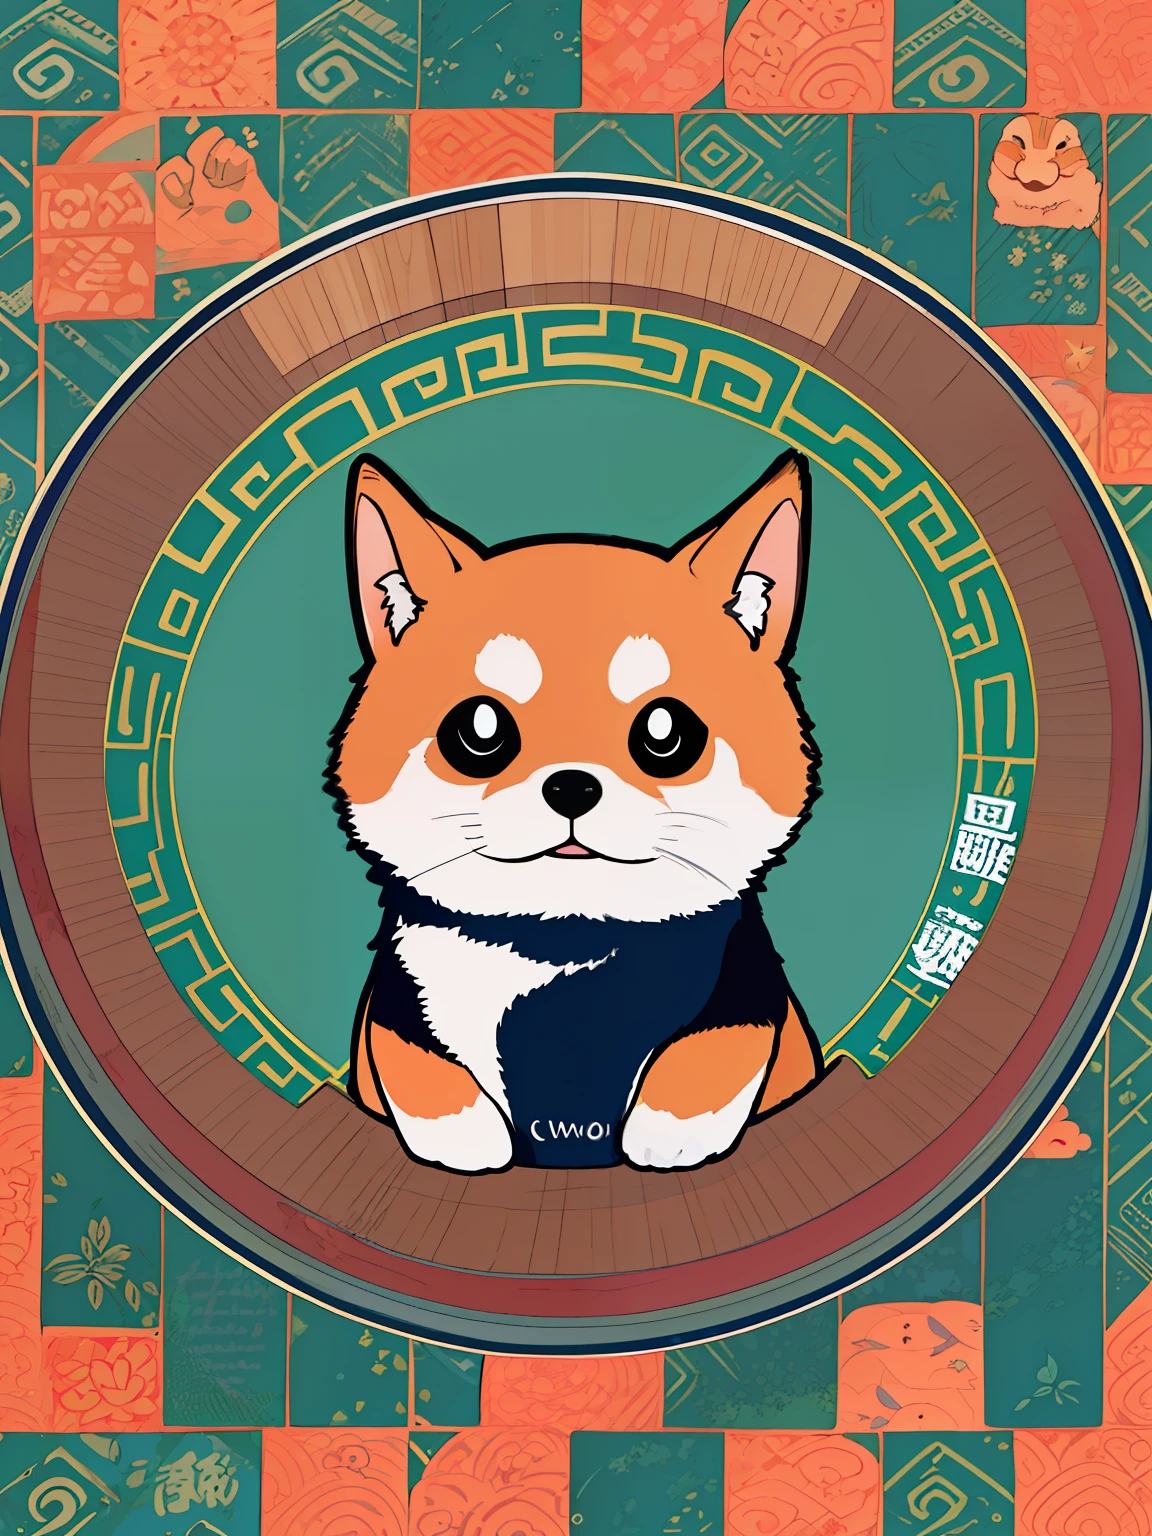 There are many different animals and text written in Chinese, hand-drawn cartoon art style, art covers, kawaii cutest stickers, sticker illustrations, Shiba Mansion, Kono Misei, cute features, Nakamoto,